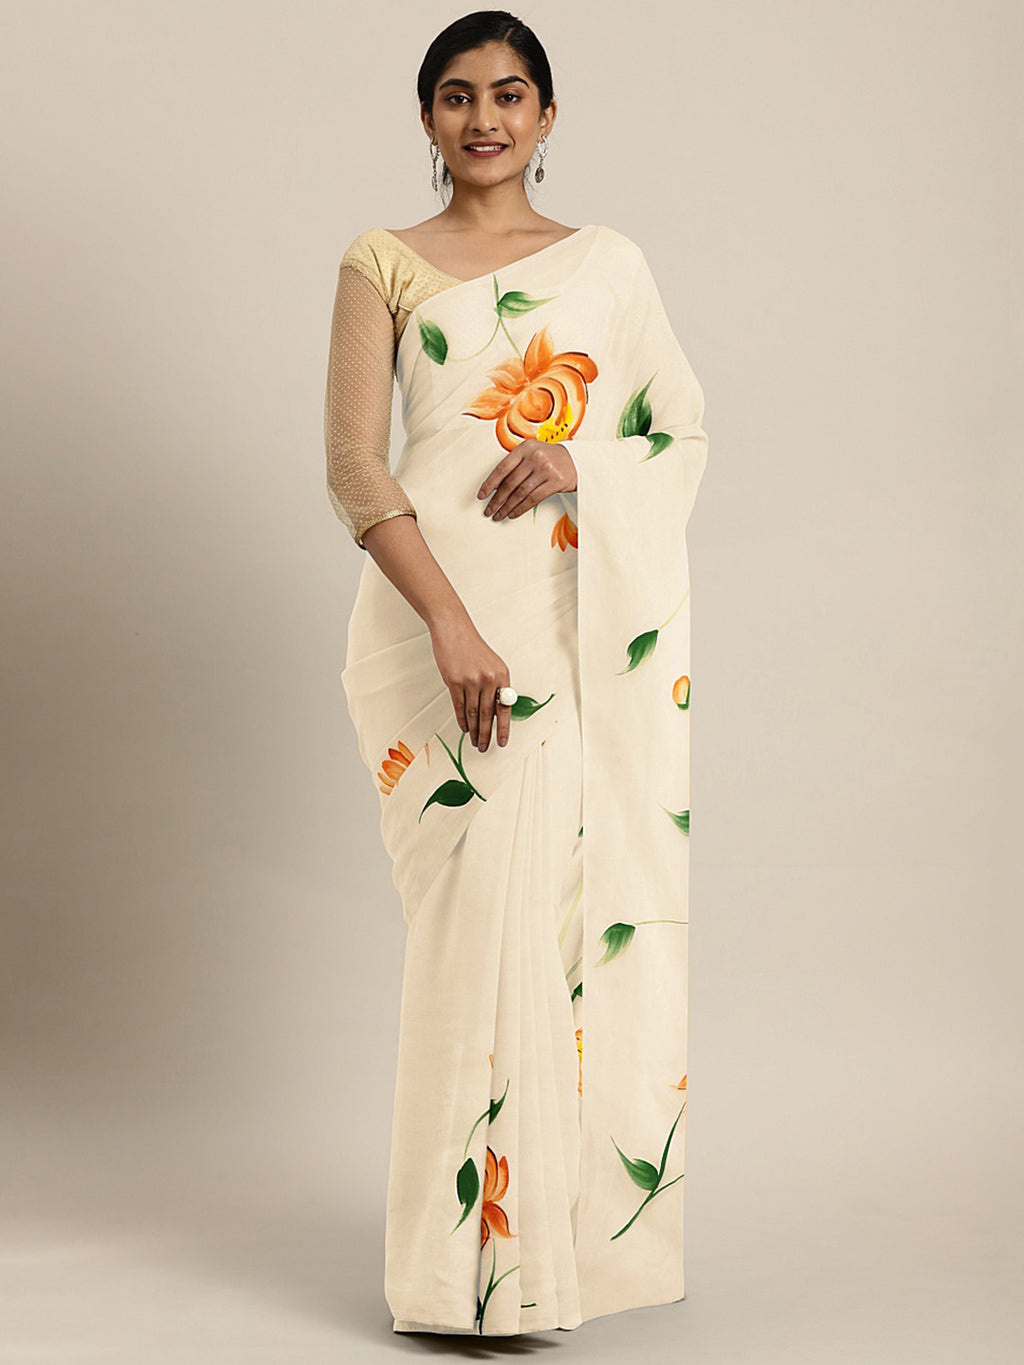 Kalakari India Organza Hand Painted Saree With Blouse BHKPSA0172-Saree-Kalakari India-BHKPSA0172-Bollywood, Fashion, Geographical Indication, Hand Crafted, Heritage Prints, Natural Dyes, Organza, Sarees, Sustainable Fabrics, Woven-[Linen,Ethnic,wear,Fashionista,Handloom,Handicraft,Indigo,blockprint,block,print,Cotton,Chanderi,Blue, latest,classy,party,bollywood,trendy,summer,style,traditional,formal,elegant,unique,style,hand,block,print, dabu,booti,gift,present,glamorous,affordable,collectible,S